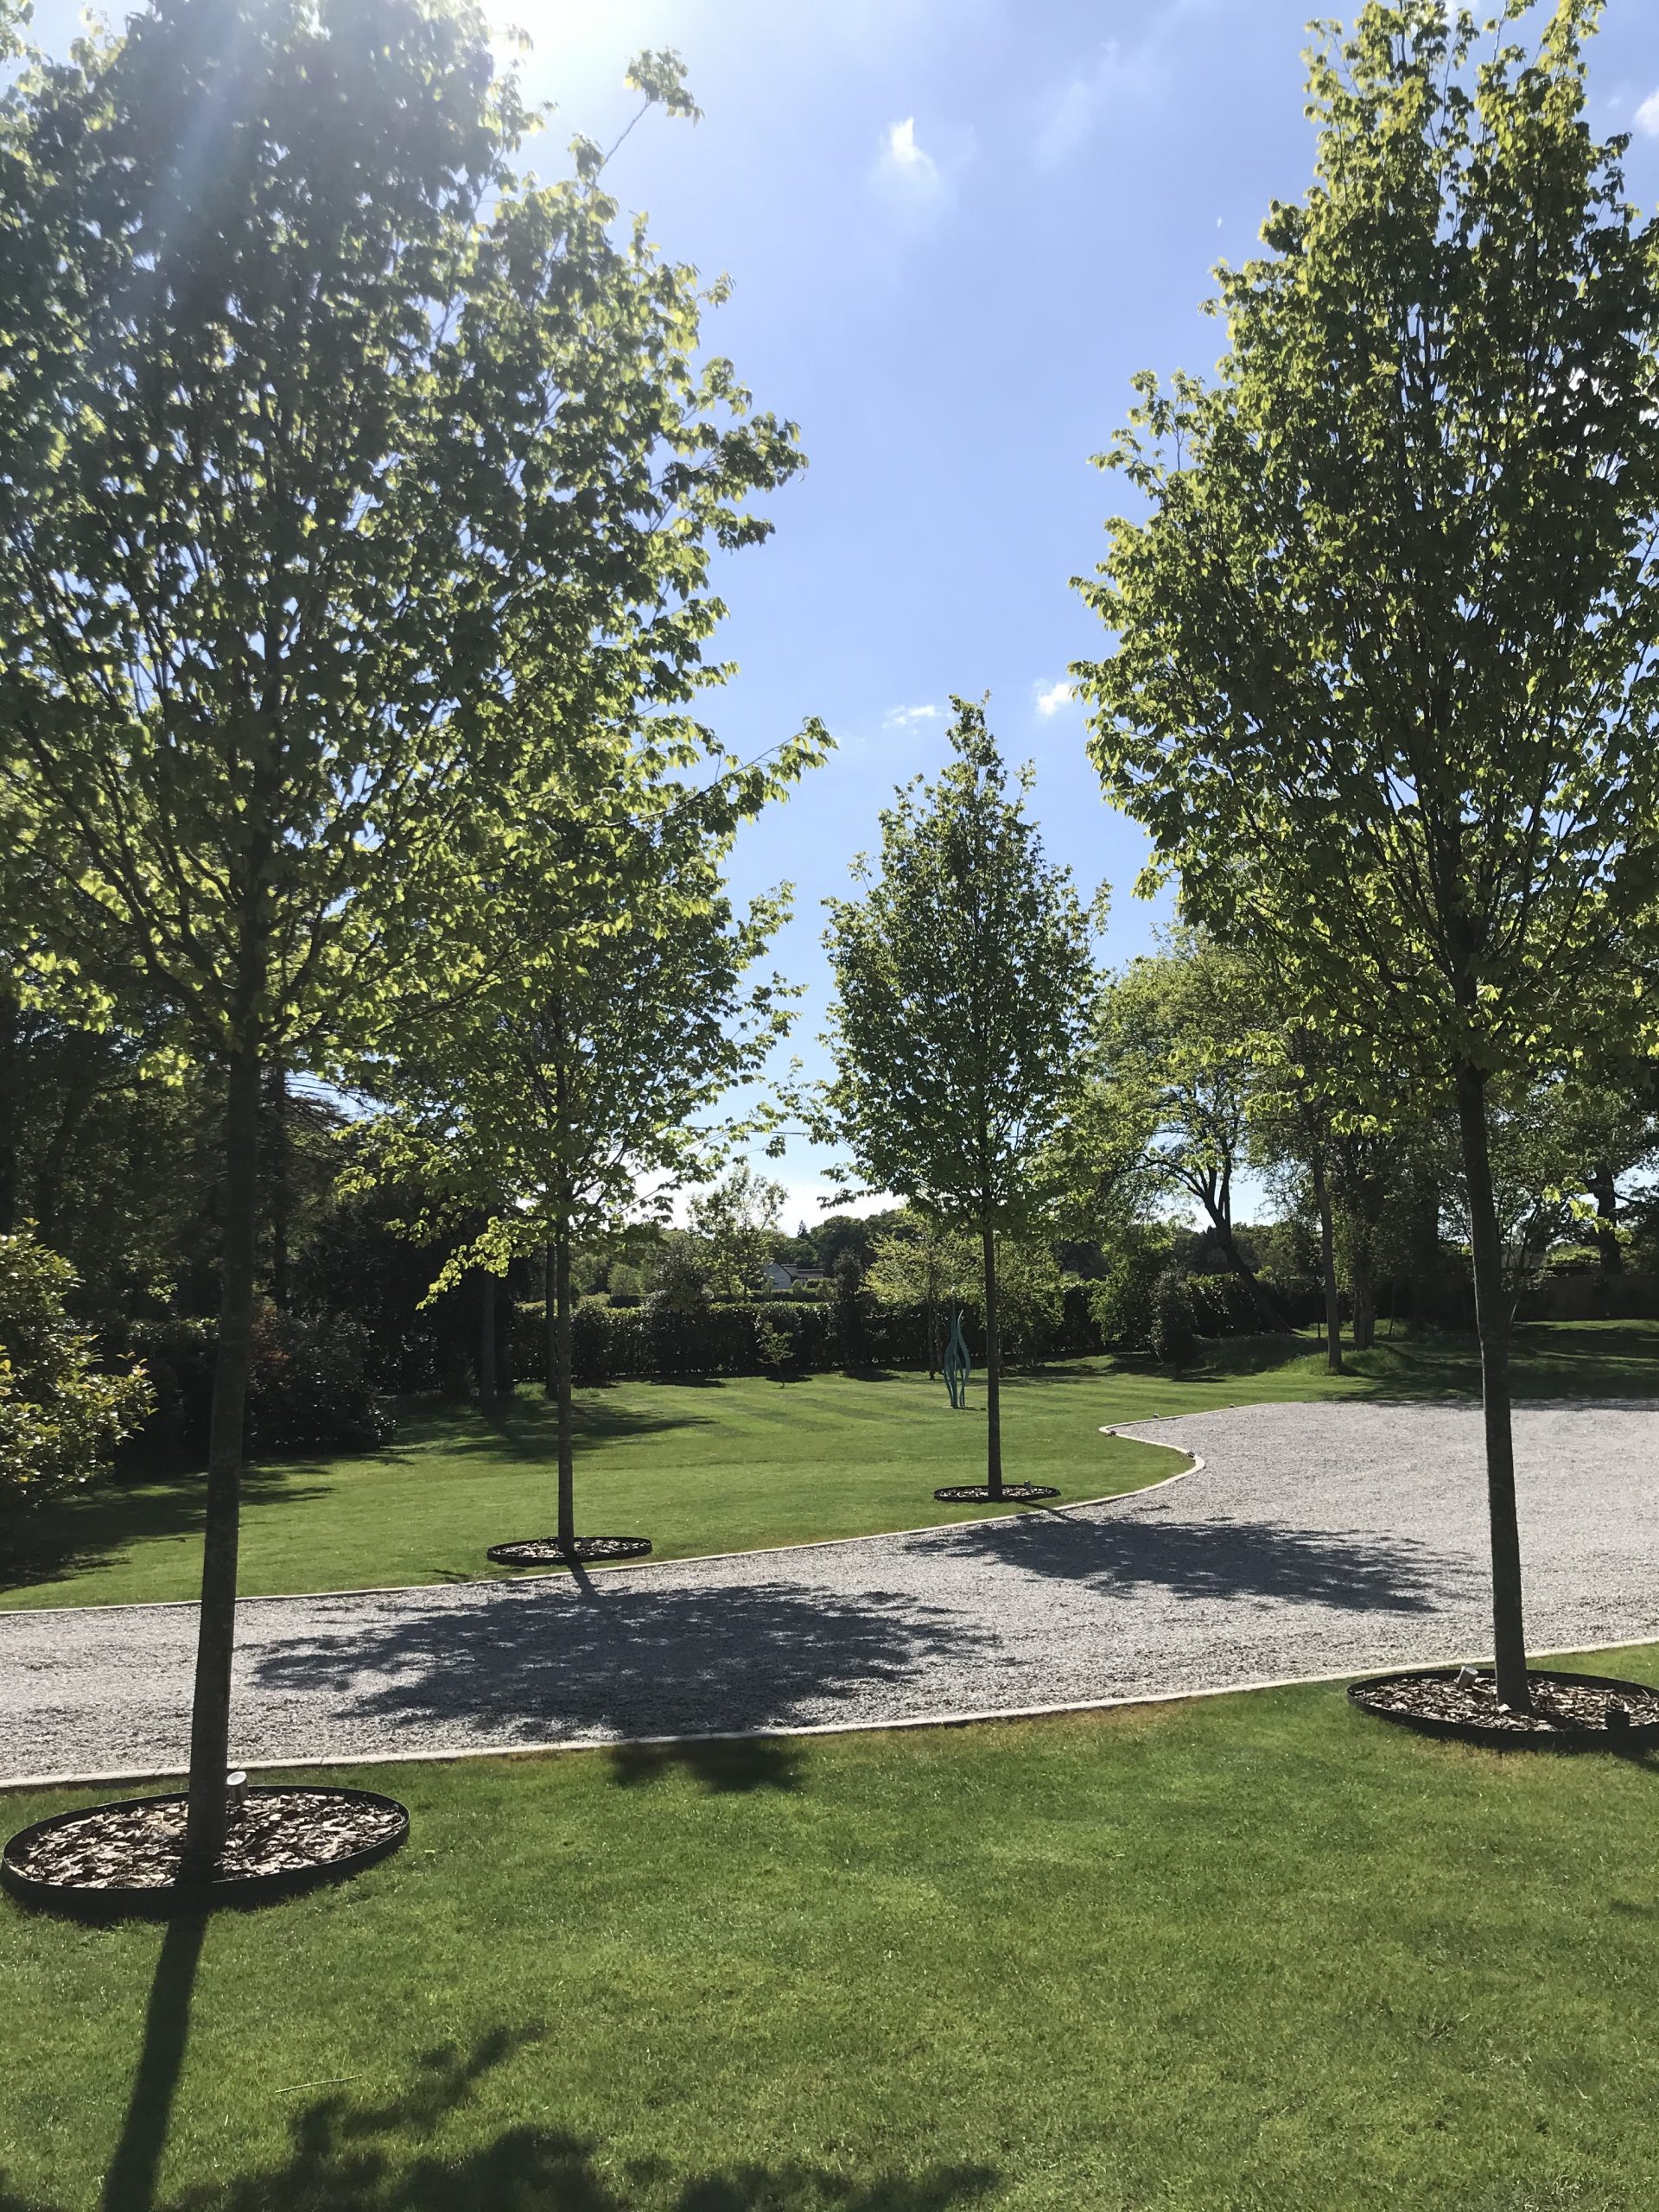 trees-with-sunny-driveway